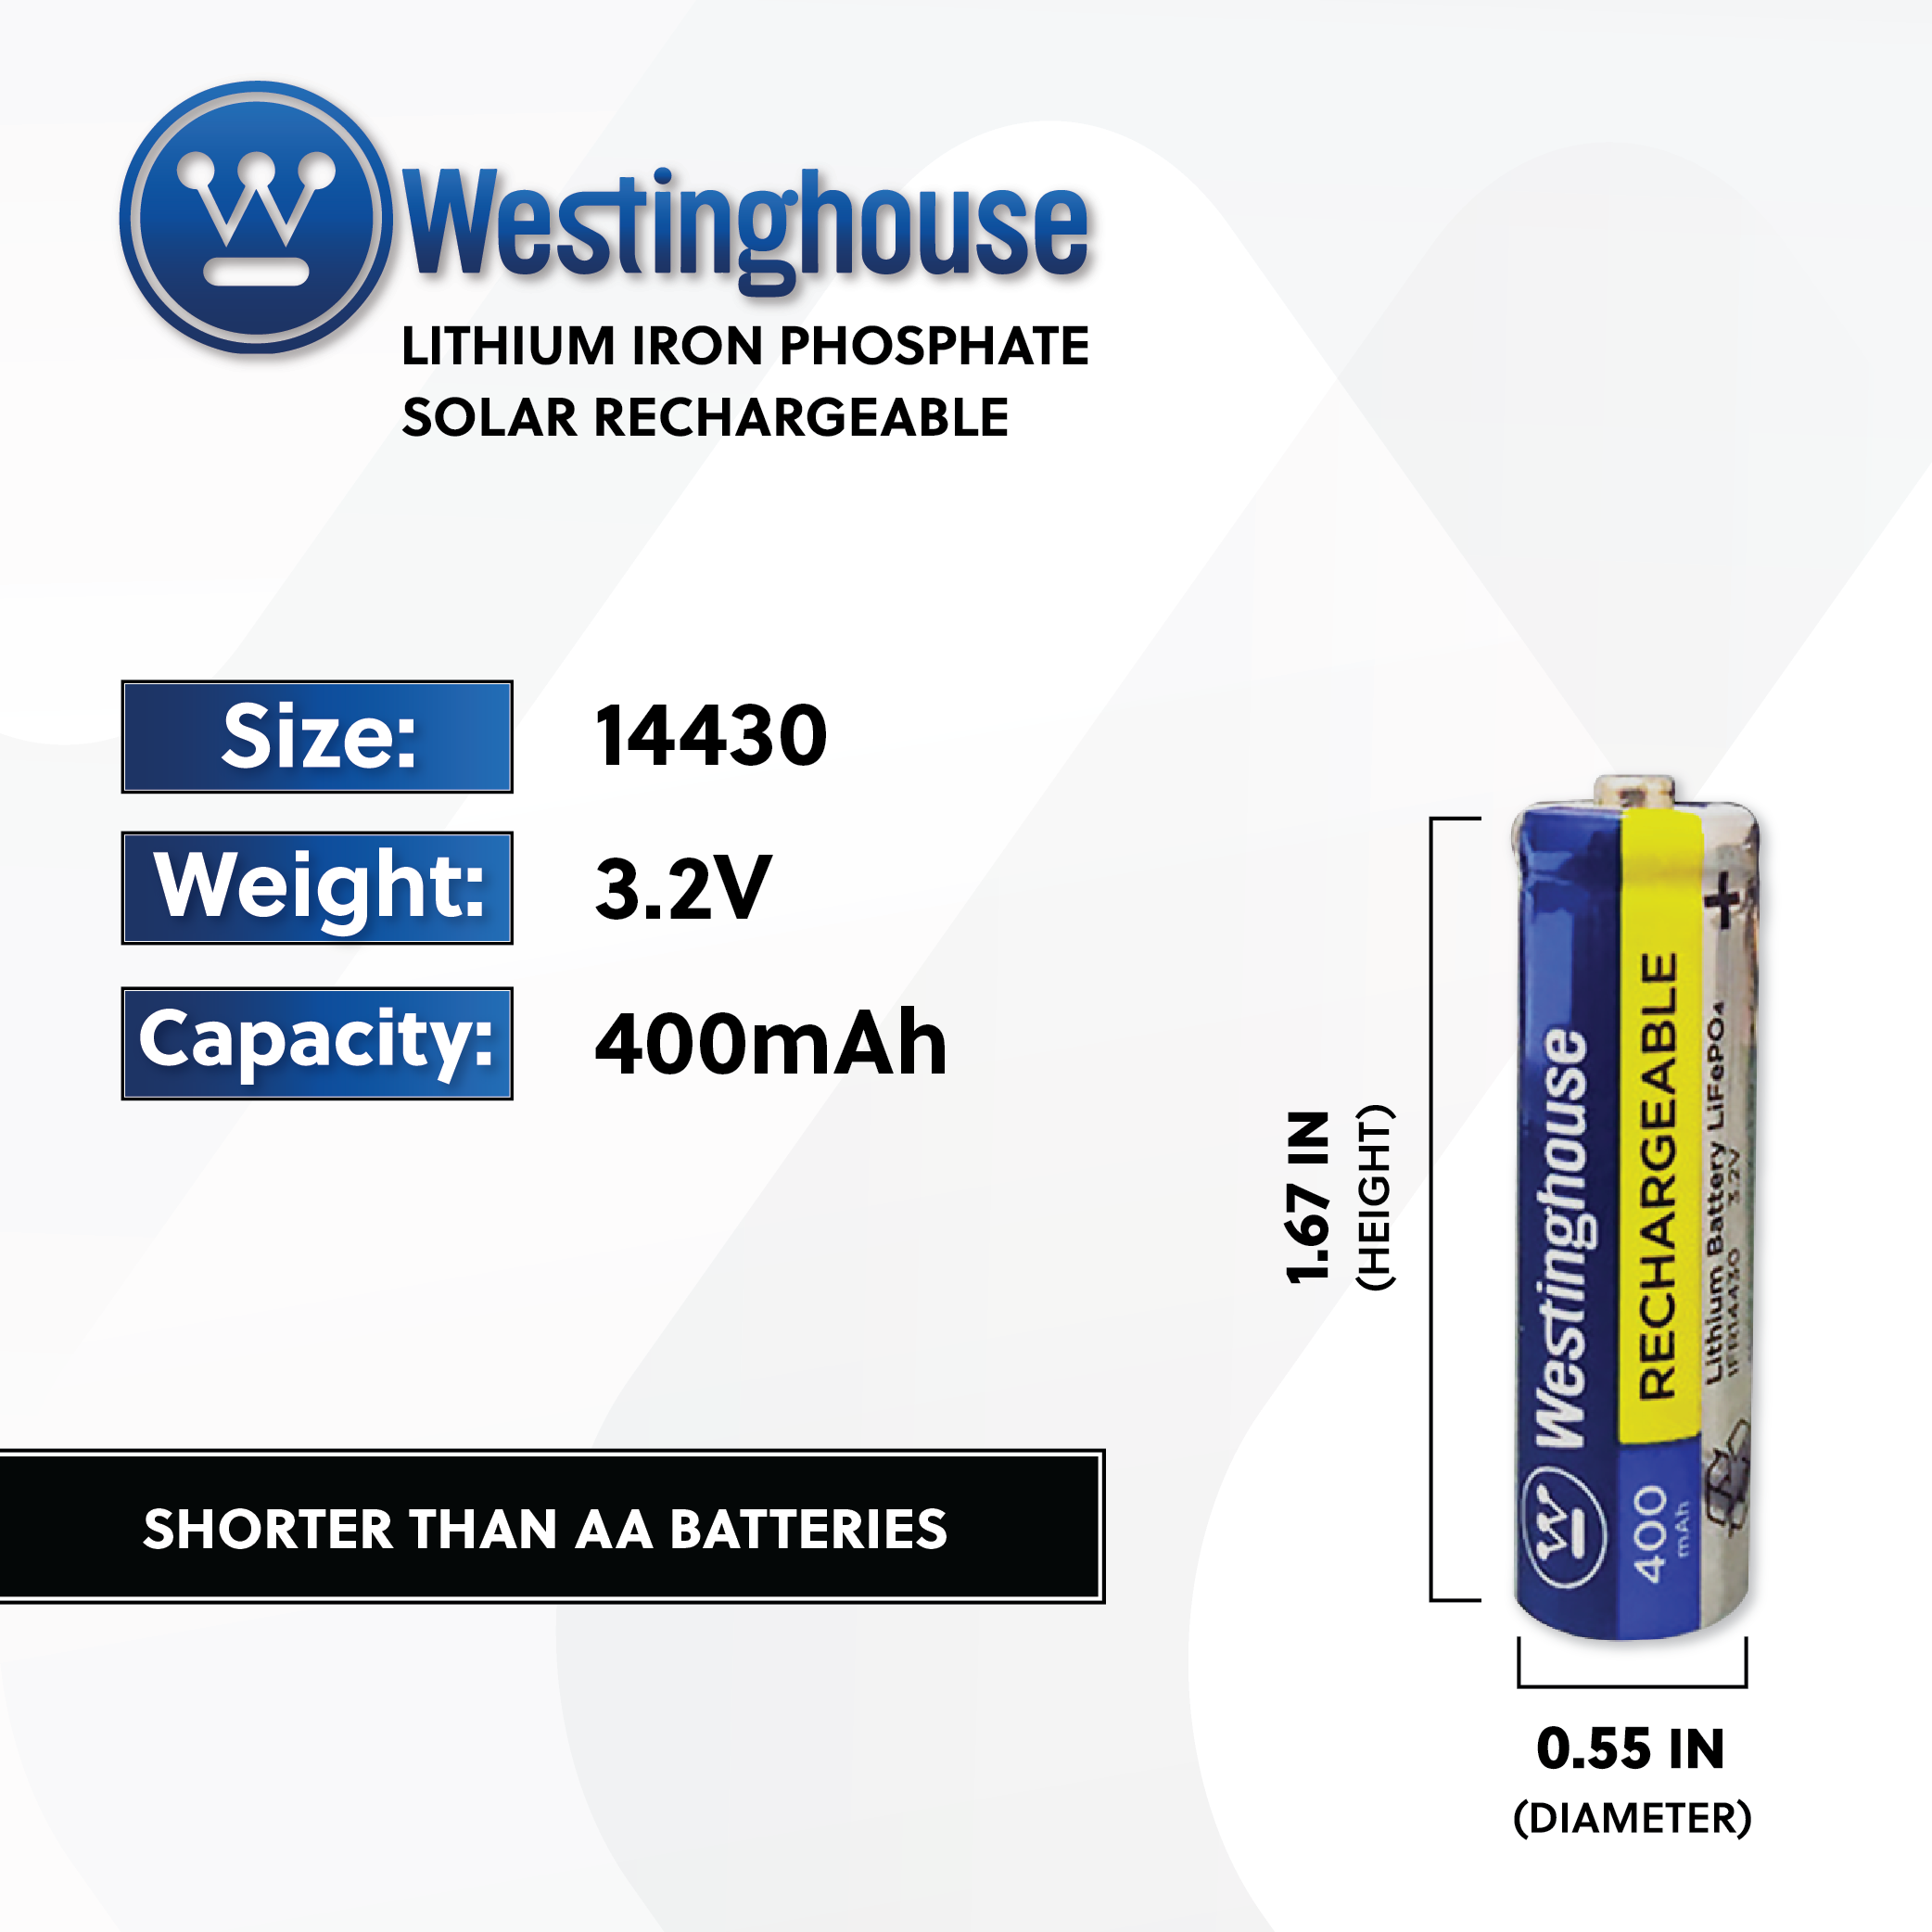 Westinghouse IFR14430 Lithium Iron Phosphate Rechargeable Battery 400mAh Blister Pack of 4